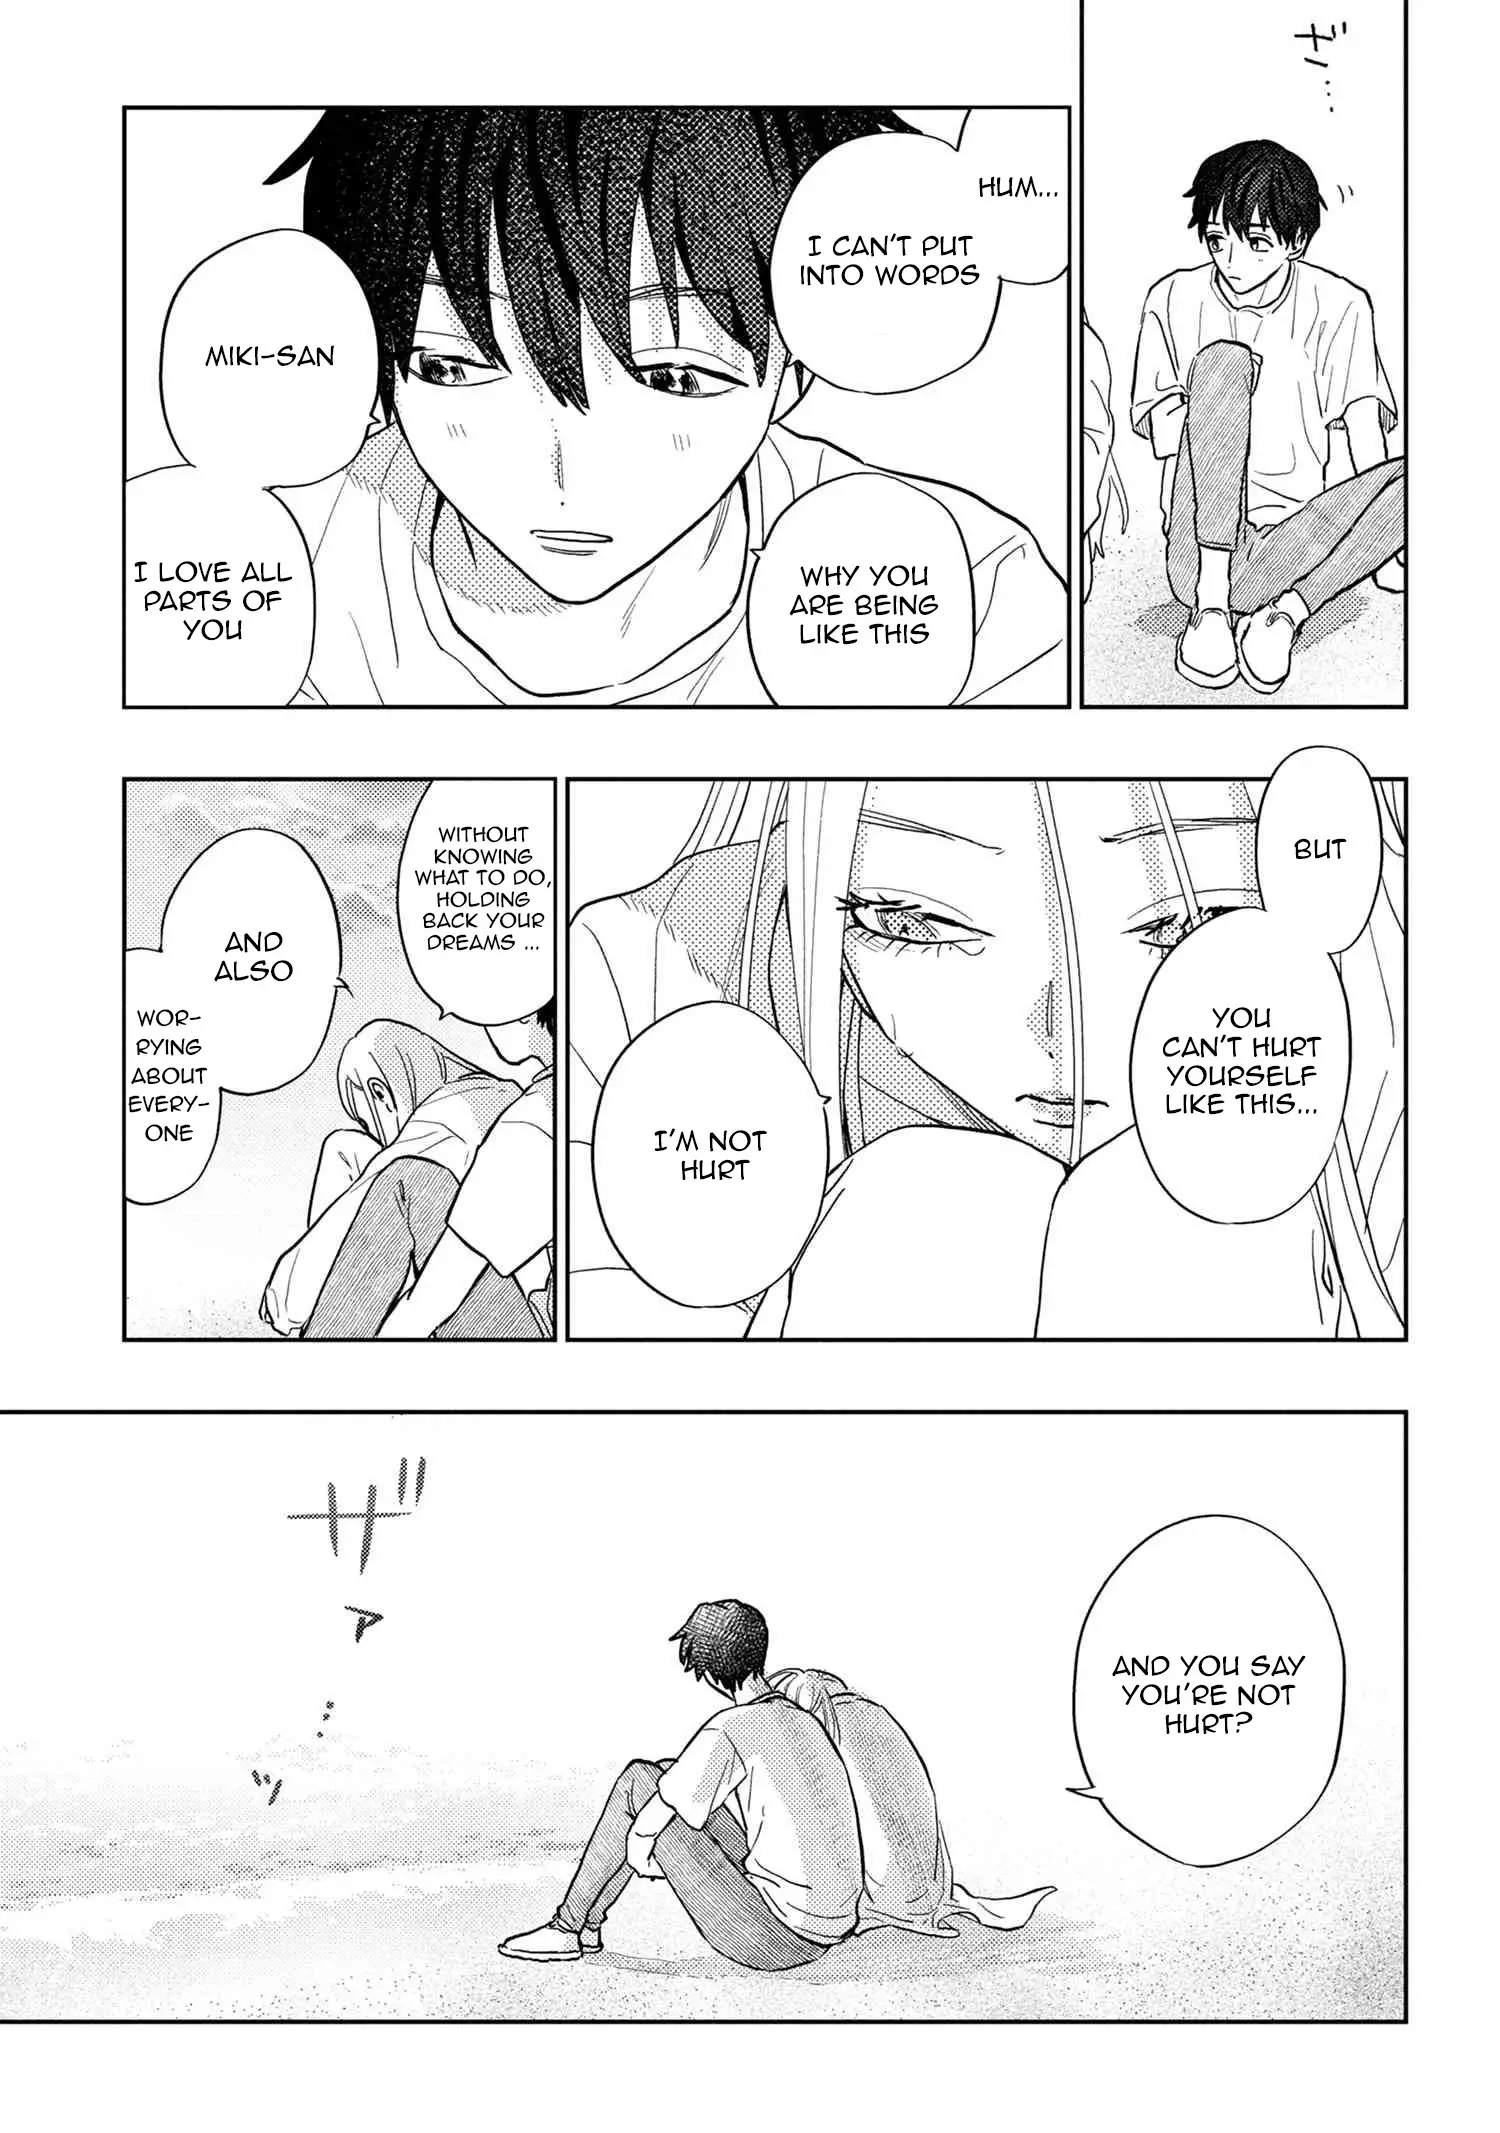 I Love You, Miki! - 25 page 9-1cff9ce3